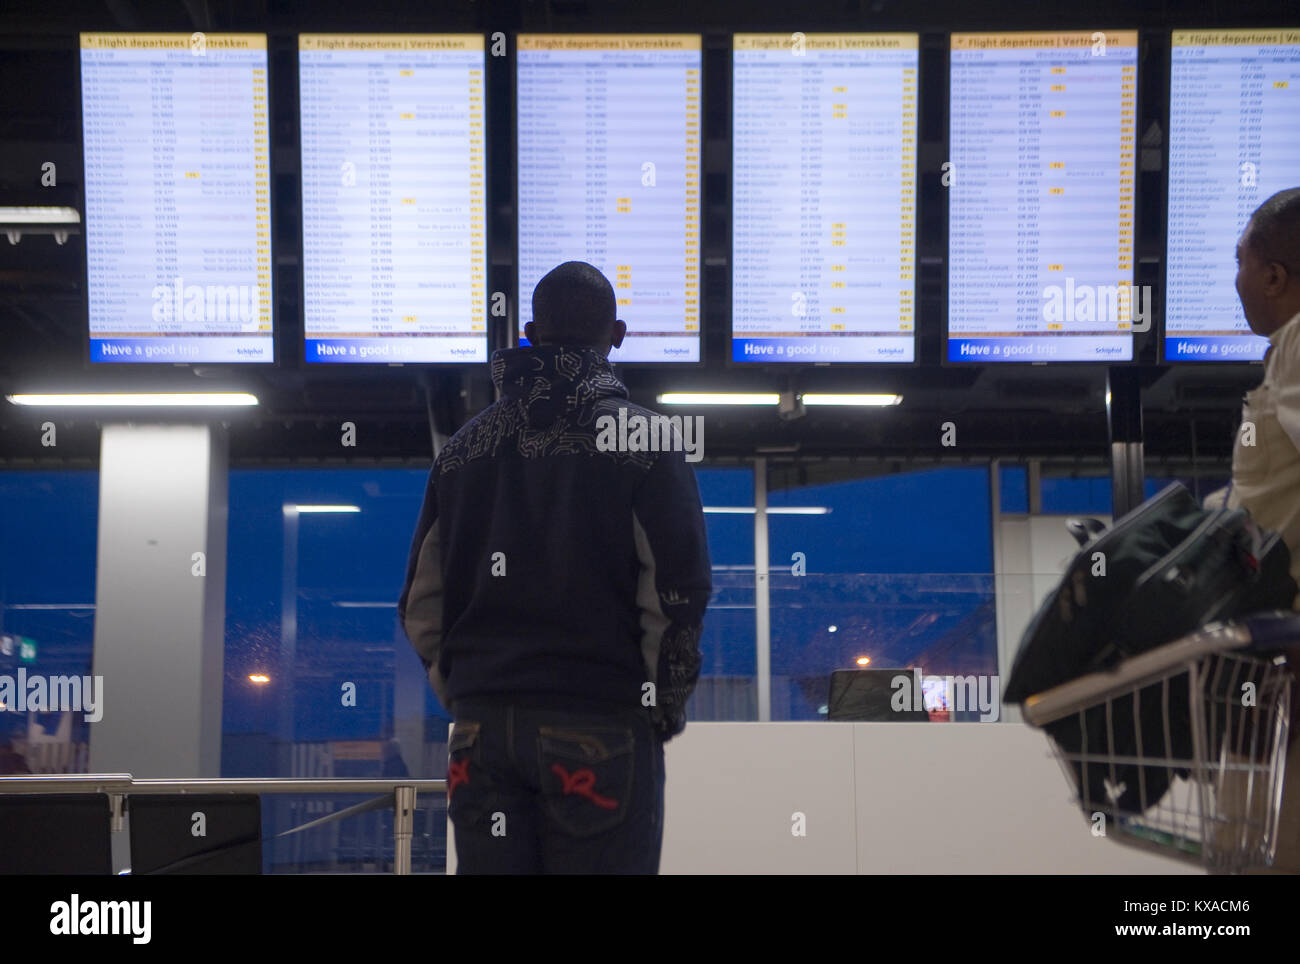 AMSTERDAM, NETHERLANDS - DEC 27, 2017: A man is looking at the information screens to check his flight on Schiphol airport near Amsterdam Stock Photo